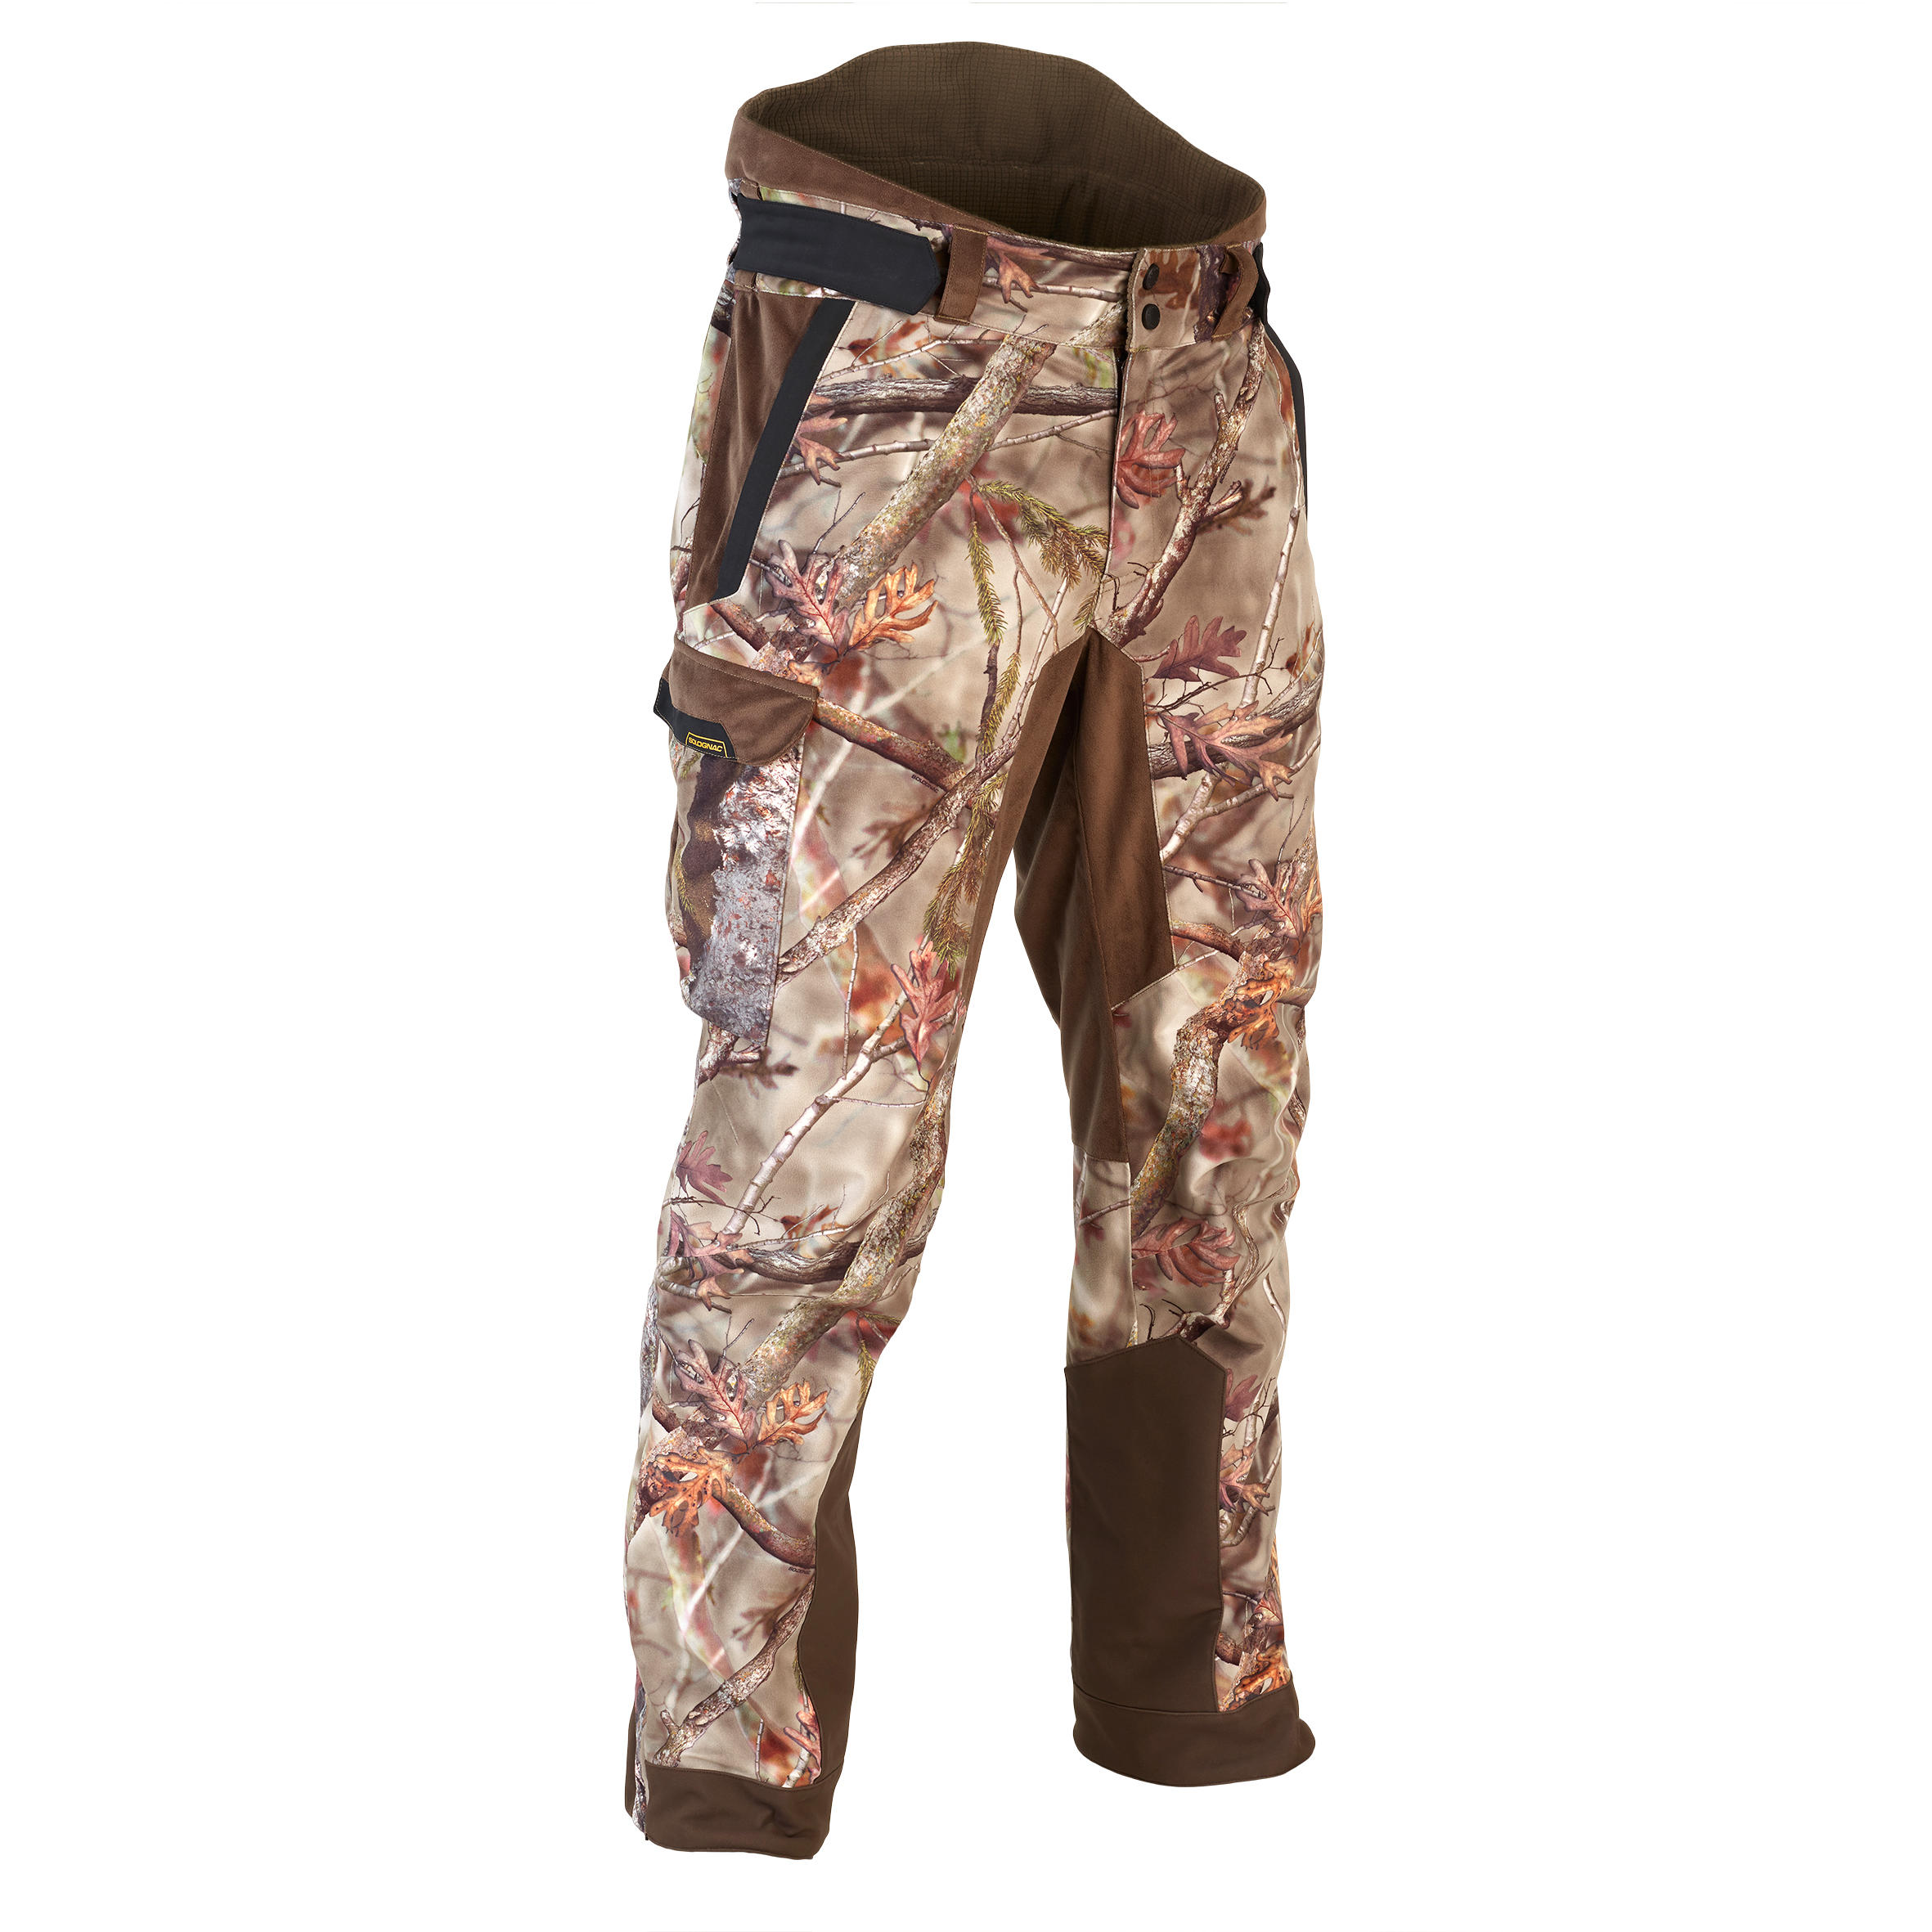 Warm and Silent Waterproof Trousers - Camo - Decathlon